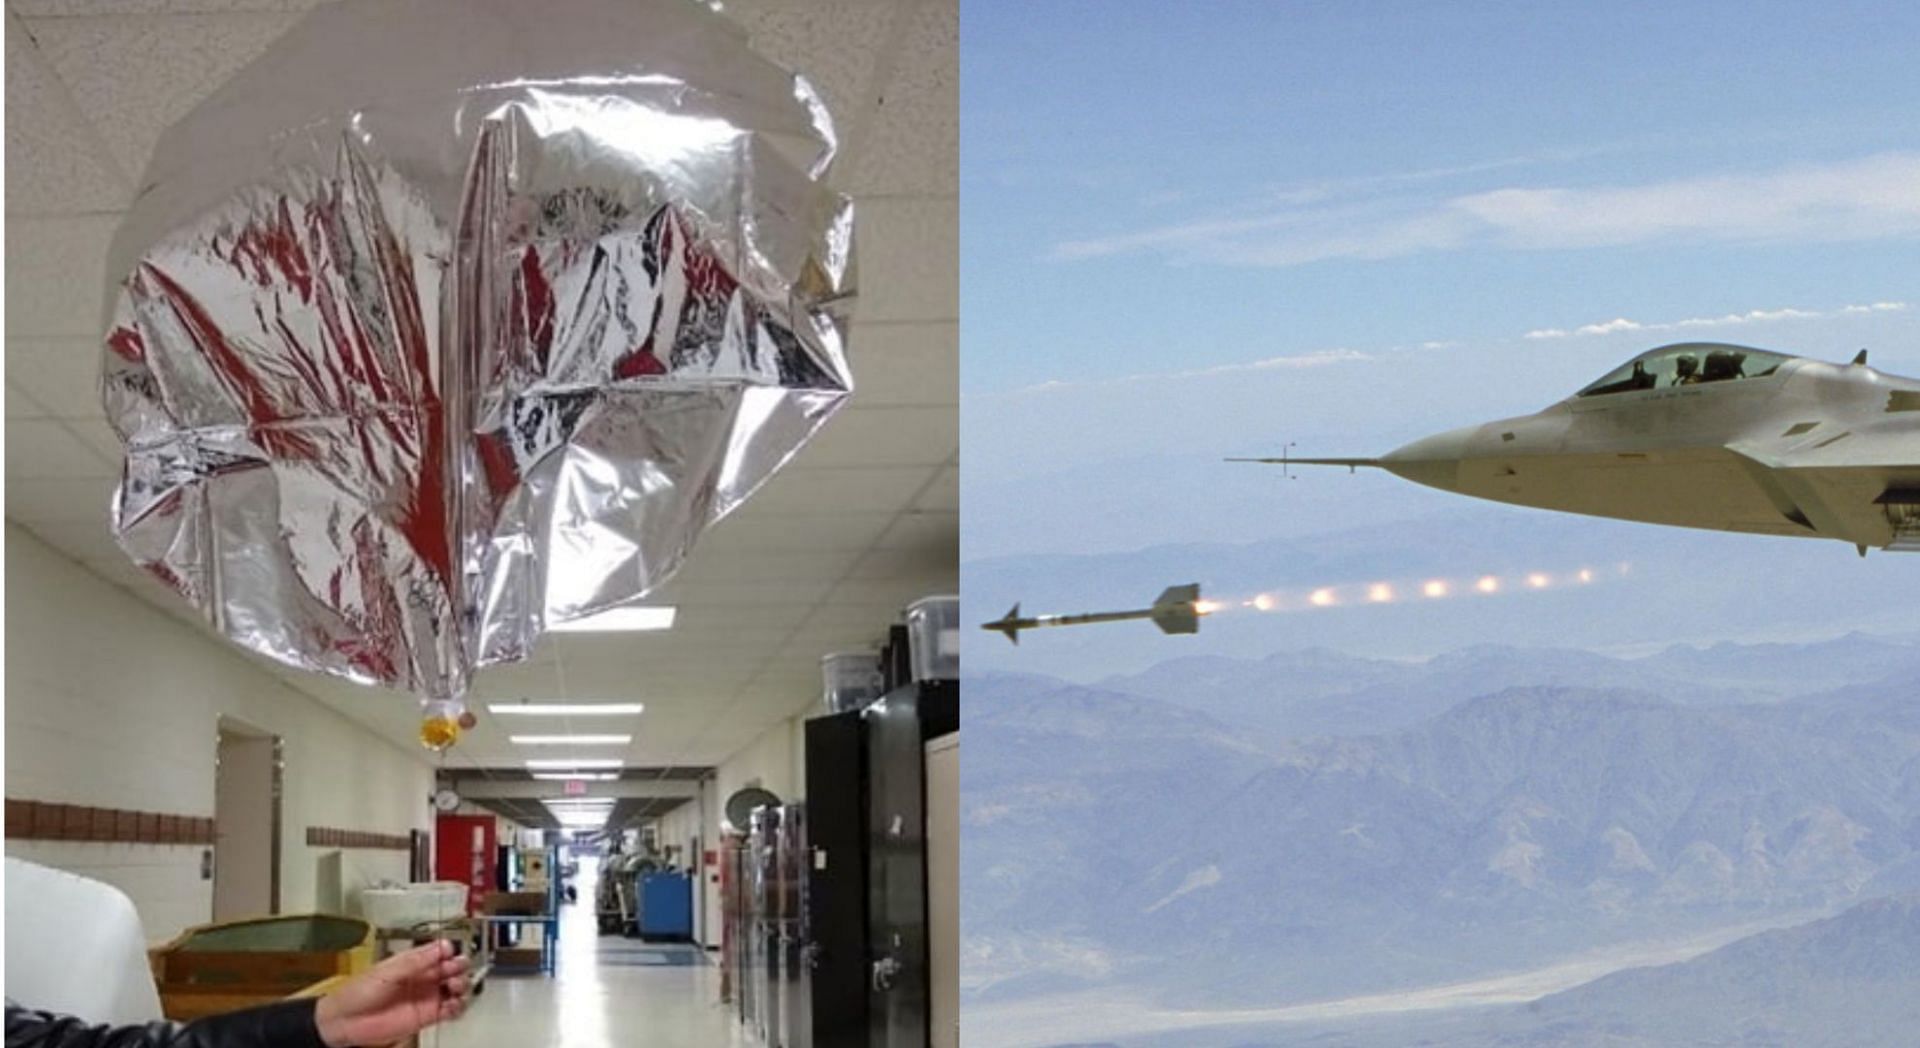 Speculation suggest US government might have used $400,000 missile to down $12 pico balloon (Image via Gunter Krebs/Twitter and Getty Images)